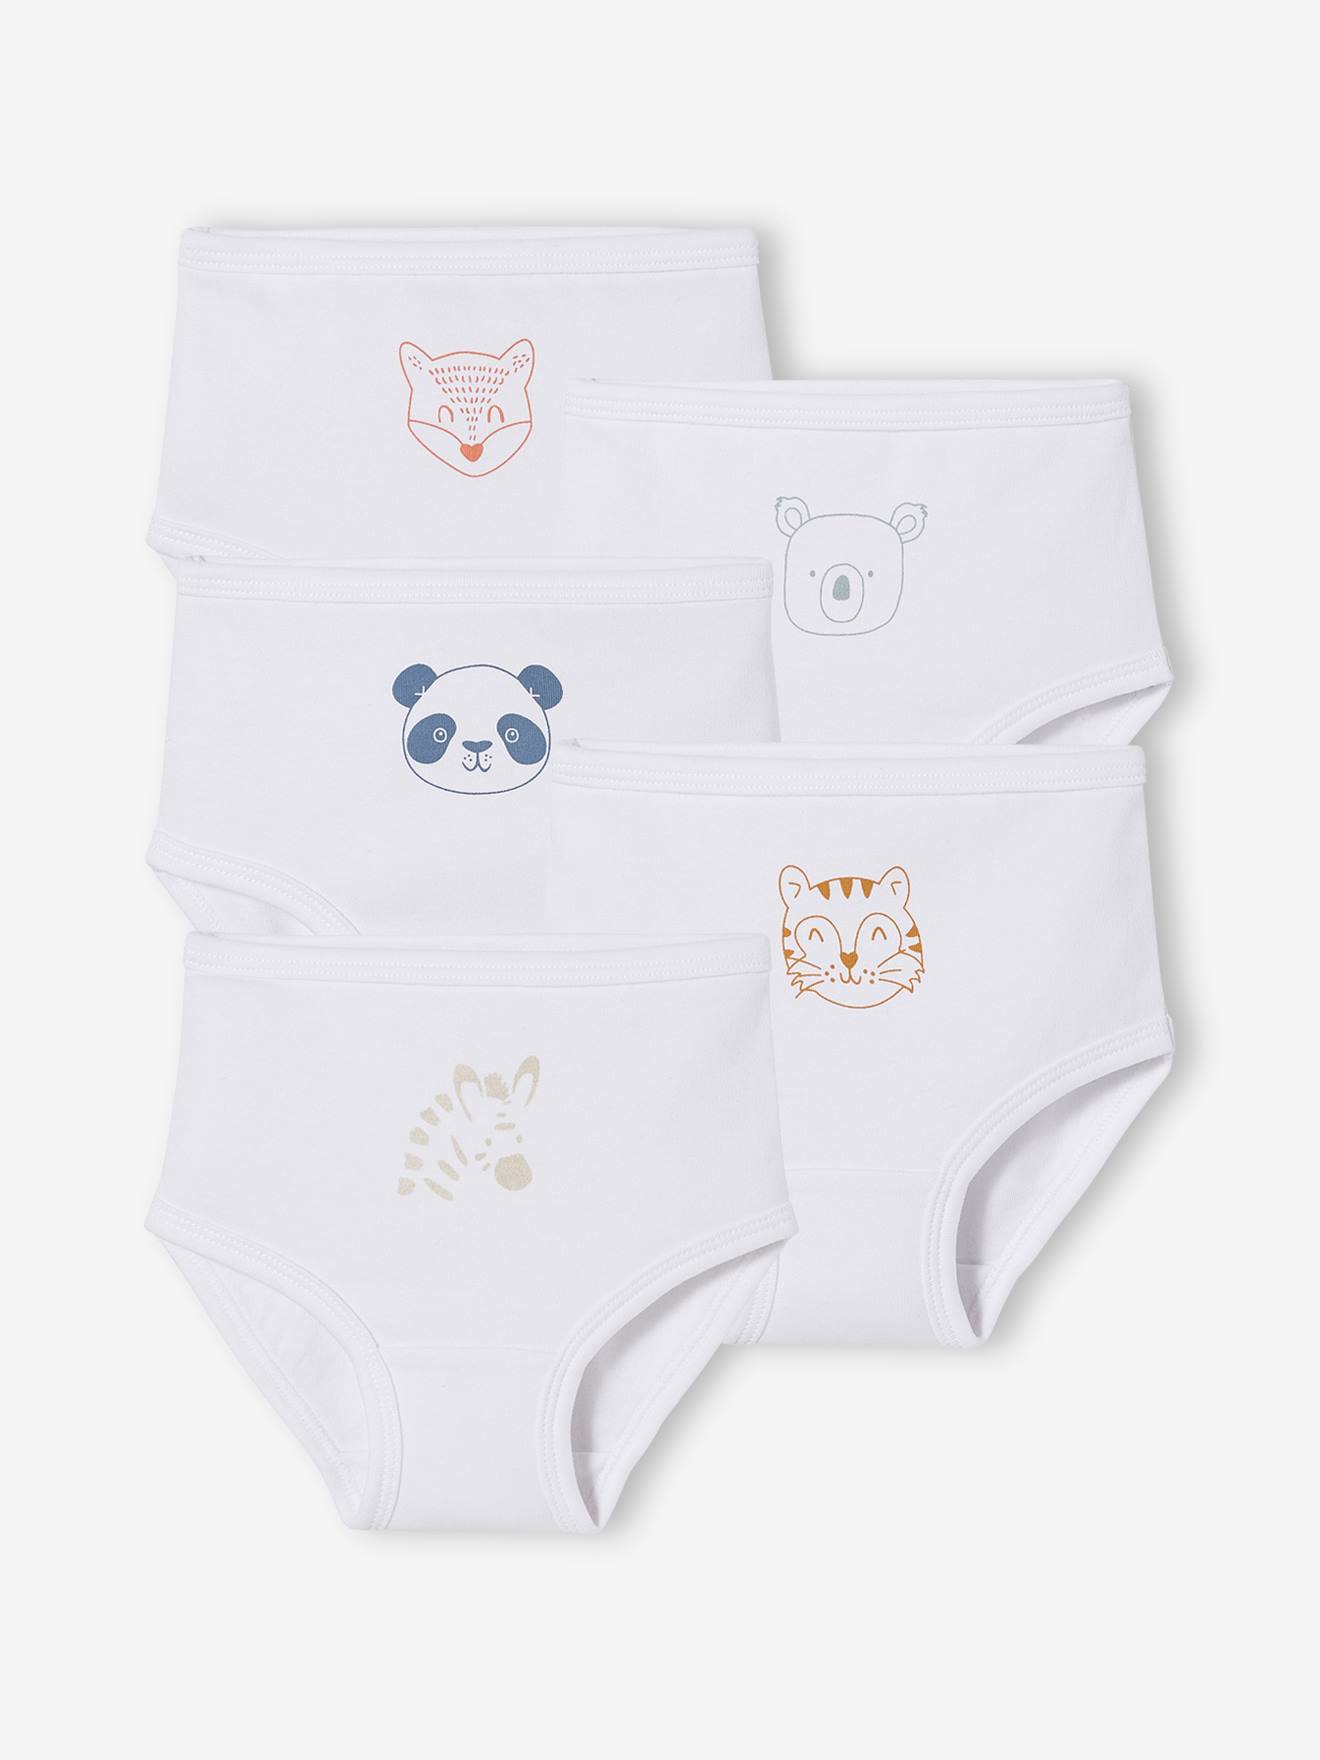 https://media.vertbaudet.co.uk/Pictures/vertbaudet/239773/pack-of-5-nappy-cover-briefs-in-pure-cotton-for-babies.jpg